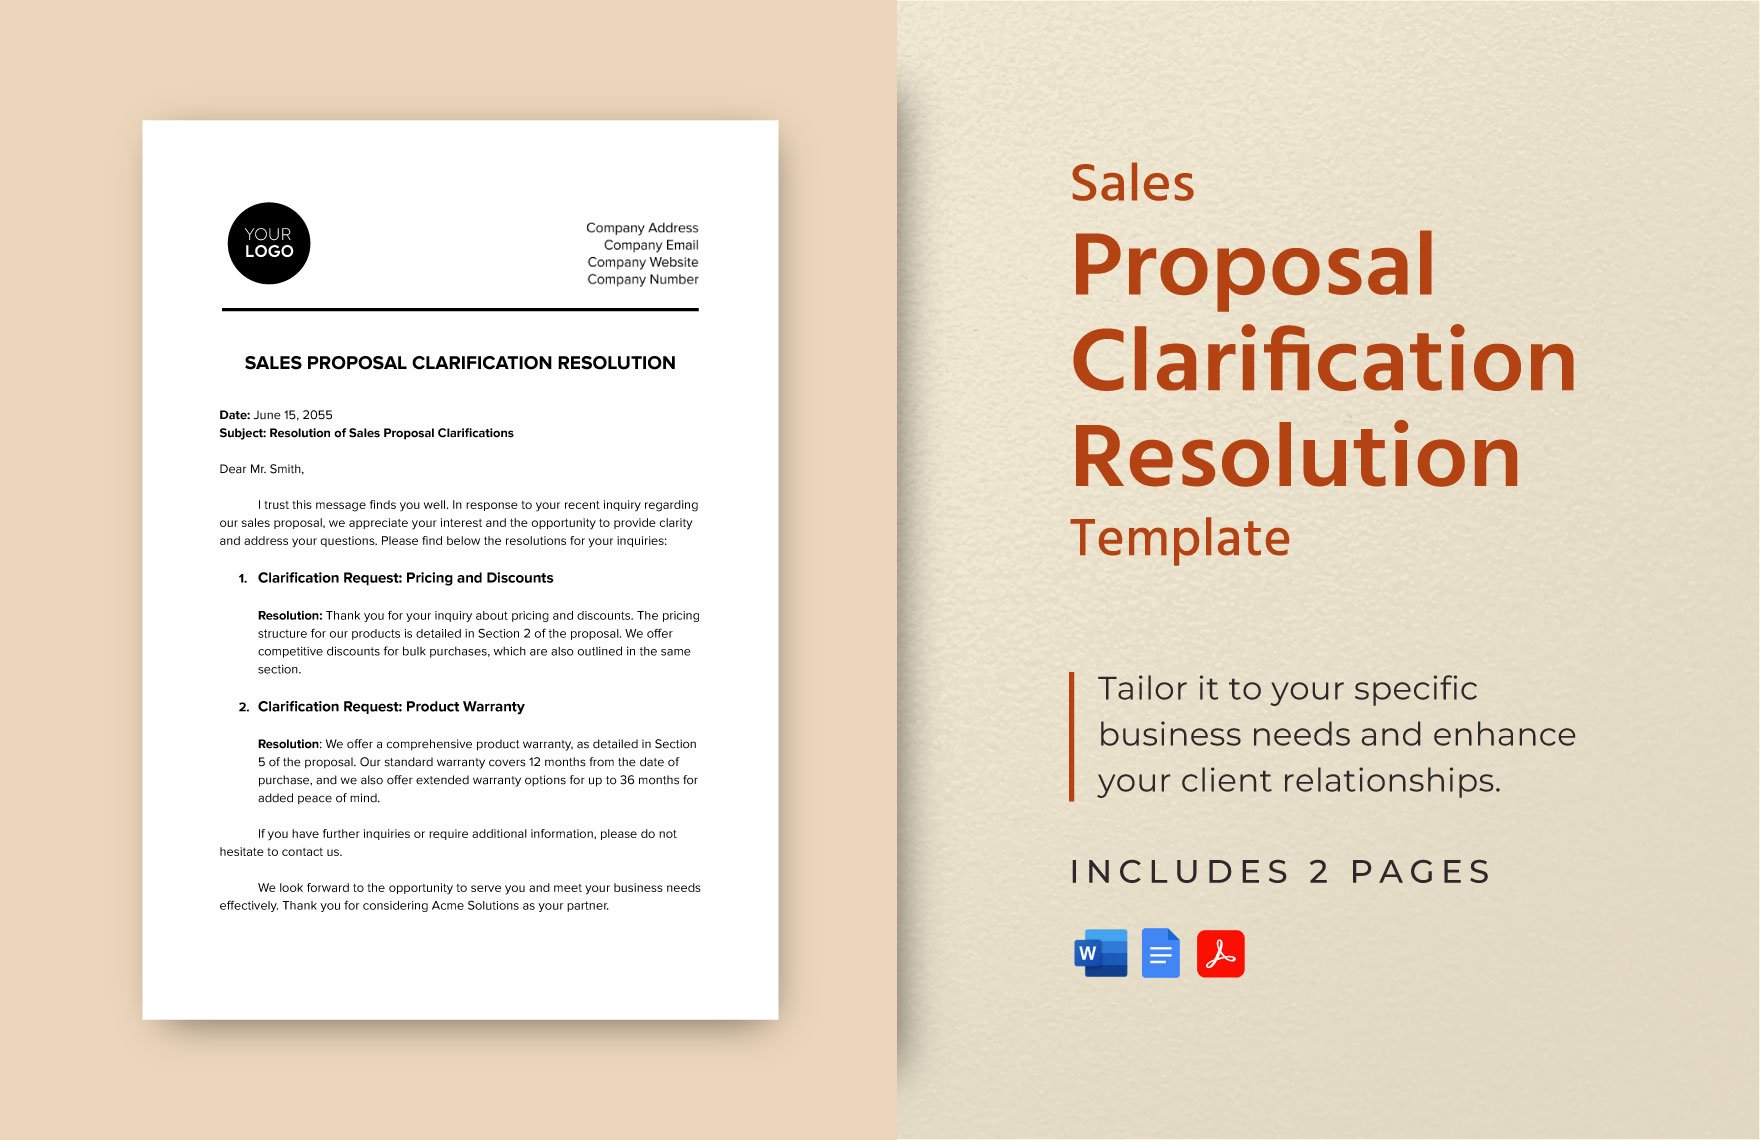 Sales Proposal Clarification Resolution Template in Word, Google Docs, PDF